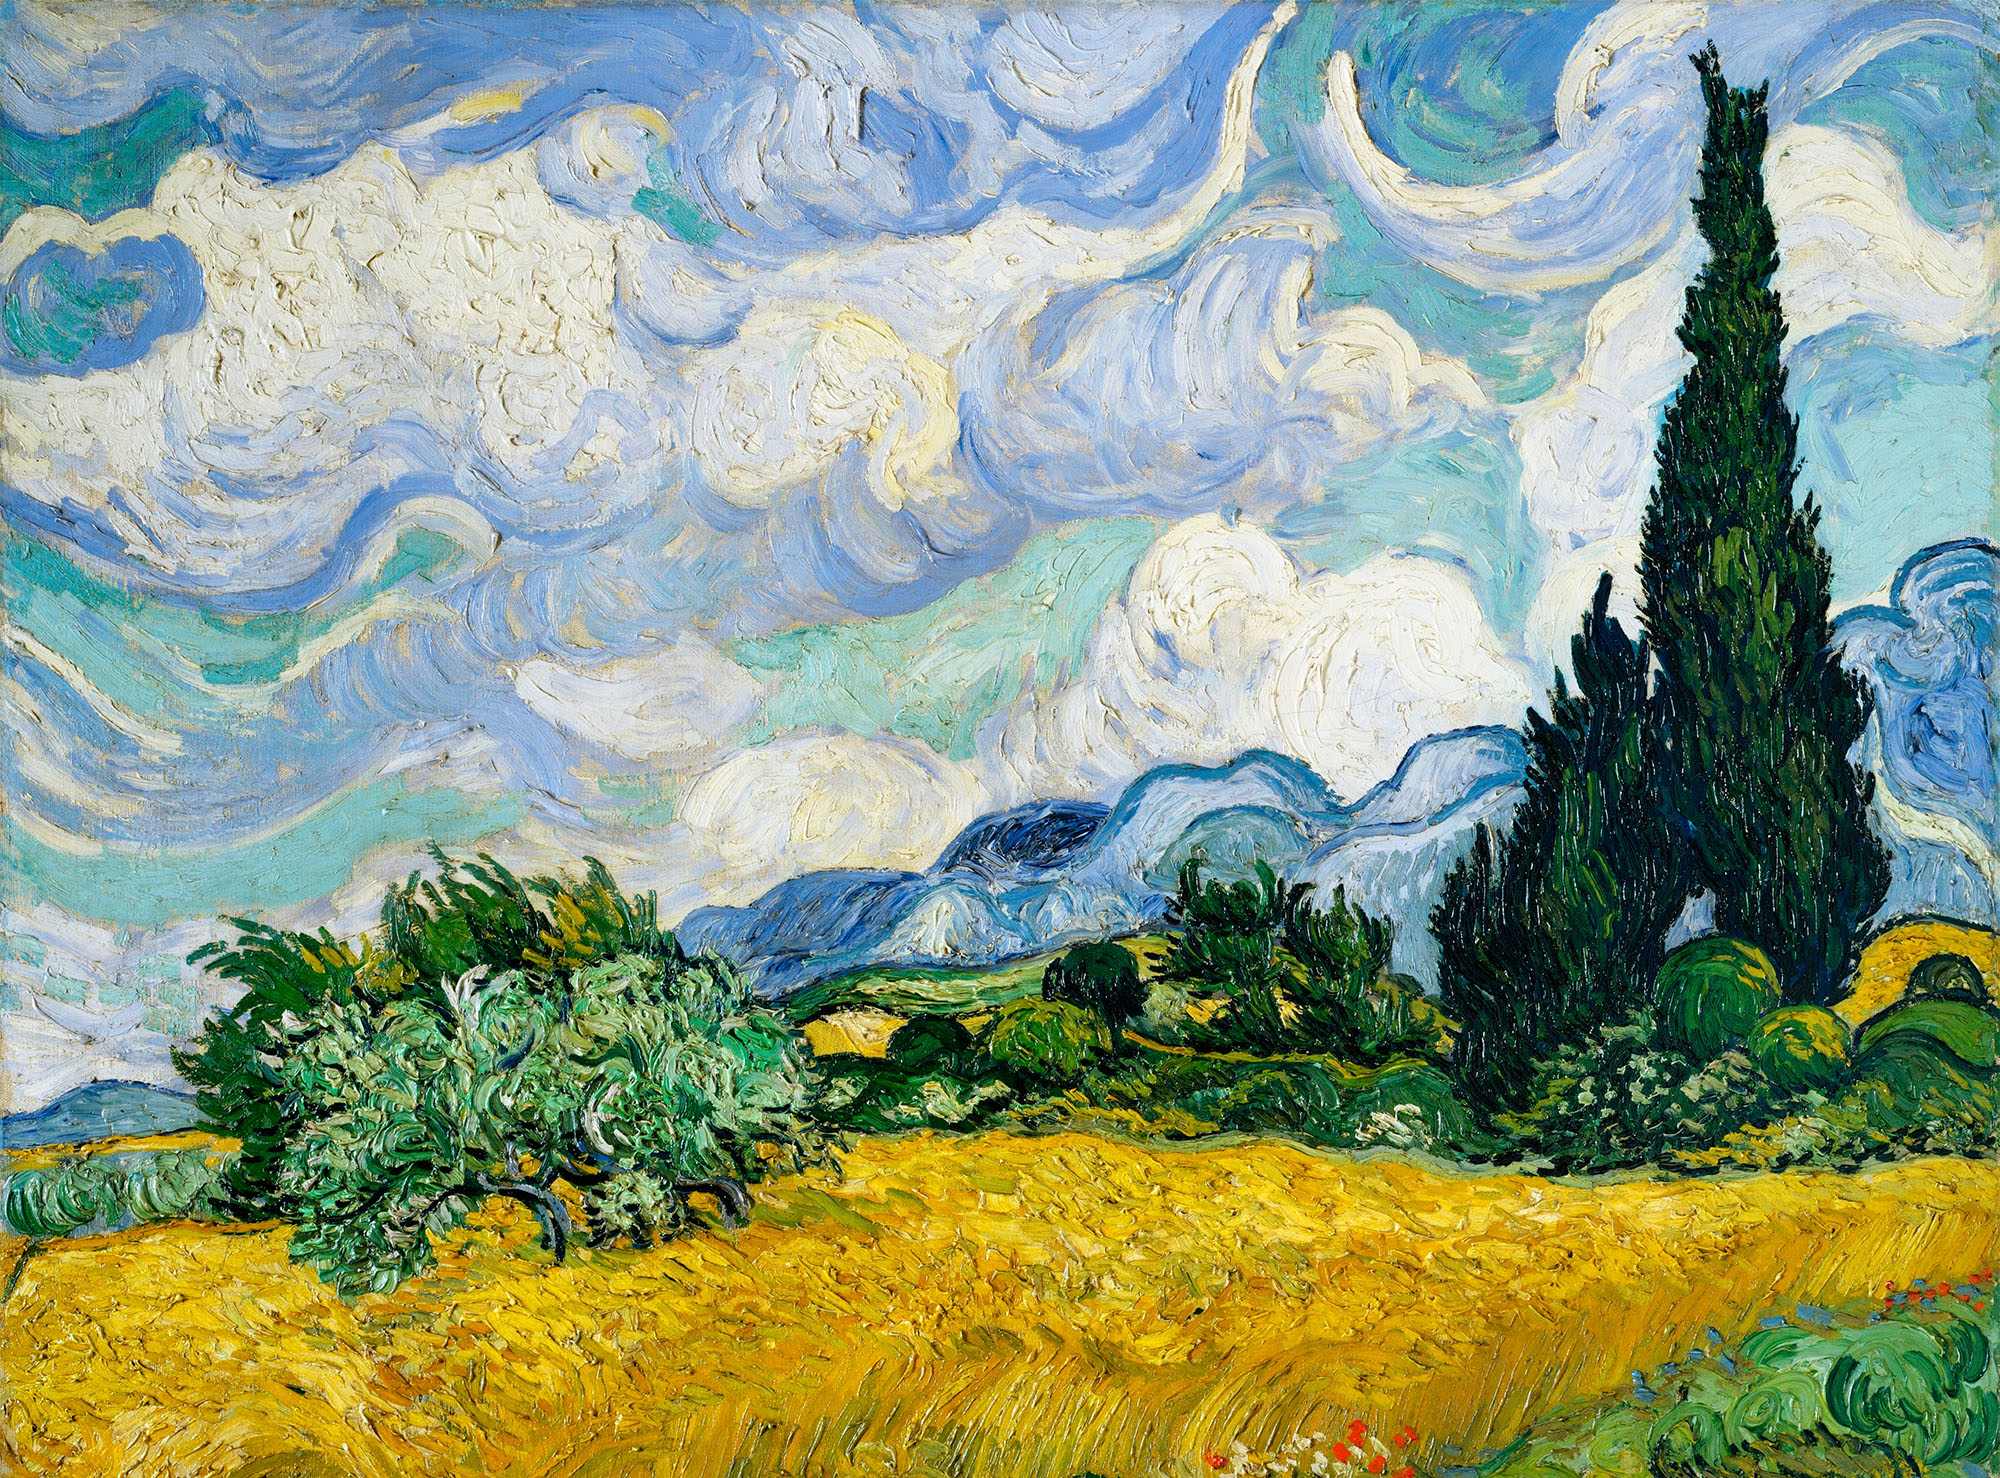 Vincent Van Gogh's Wheat Field with Cypresses (1889). Blue sky with puffy clouds. Tall cypress tress on right side. Golden grass.